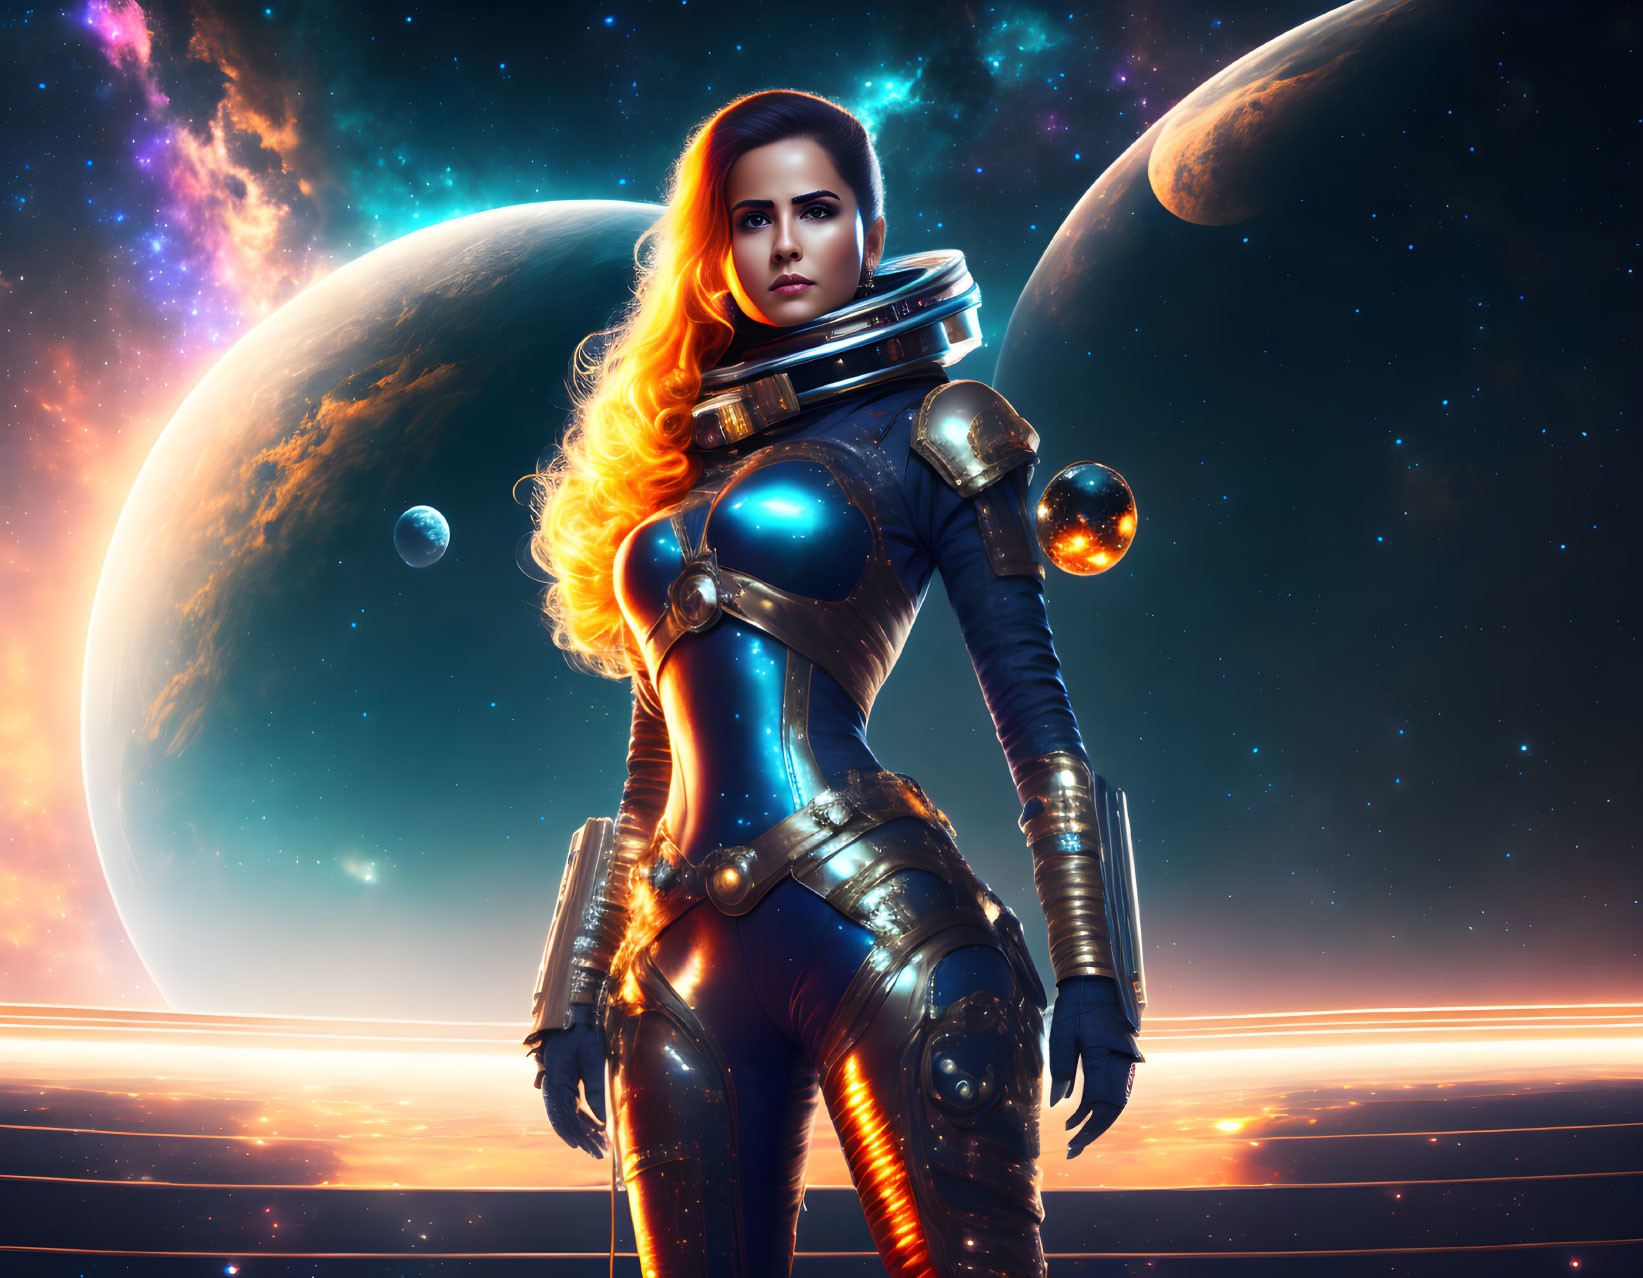 Female astronaut with fiery hair in sleek armor in space with planets and stars